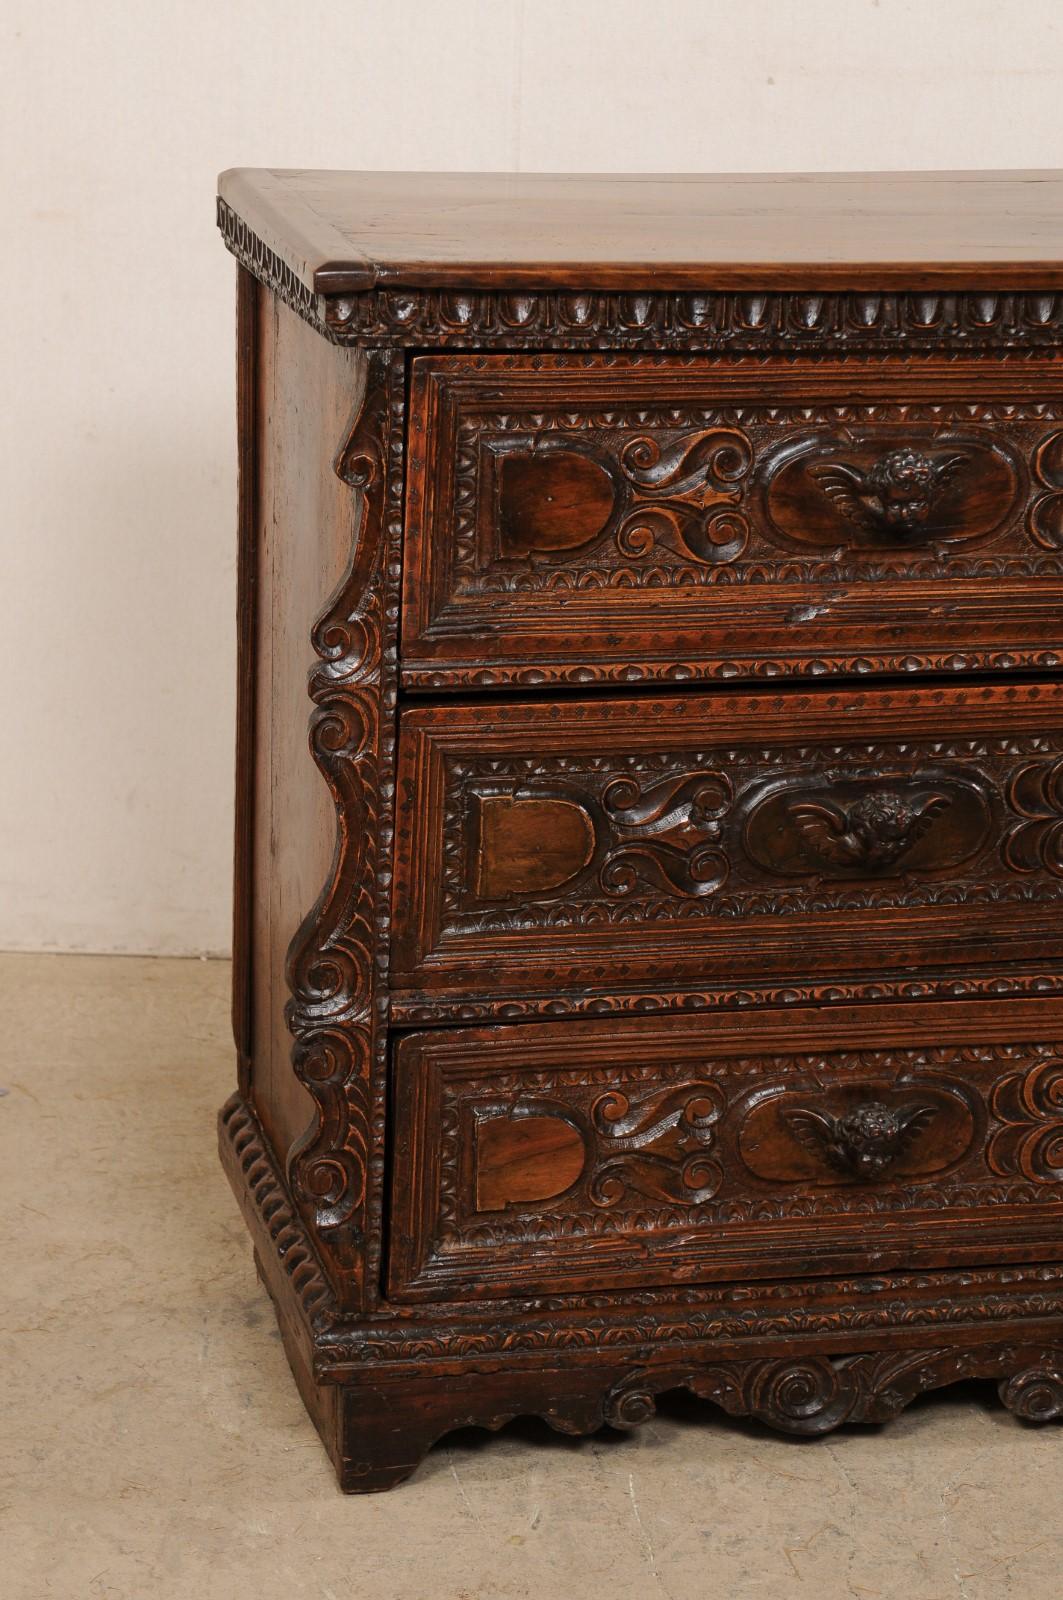 18th Century Early 18th C Italian Elaborately-Embellished Commode w/Putti Carved Drawer Pulls For Sale